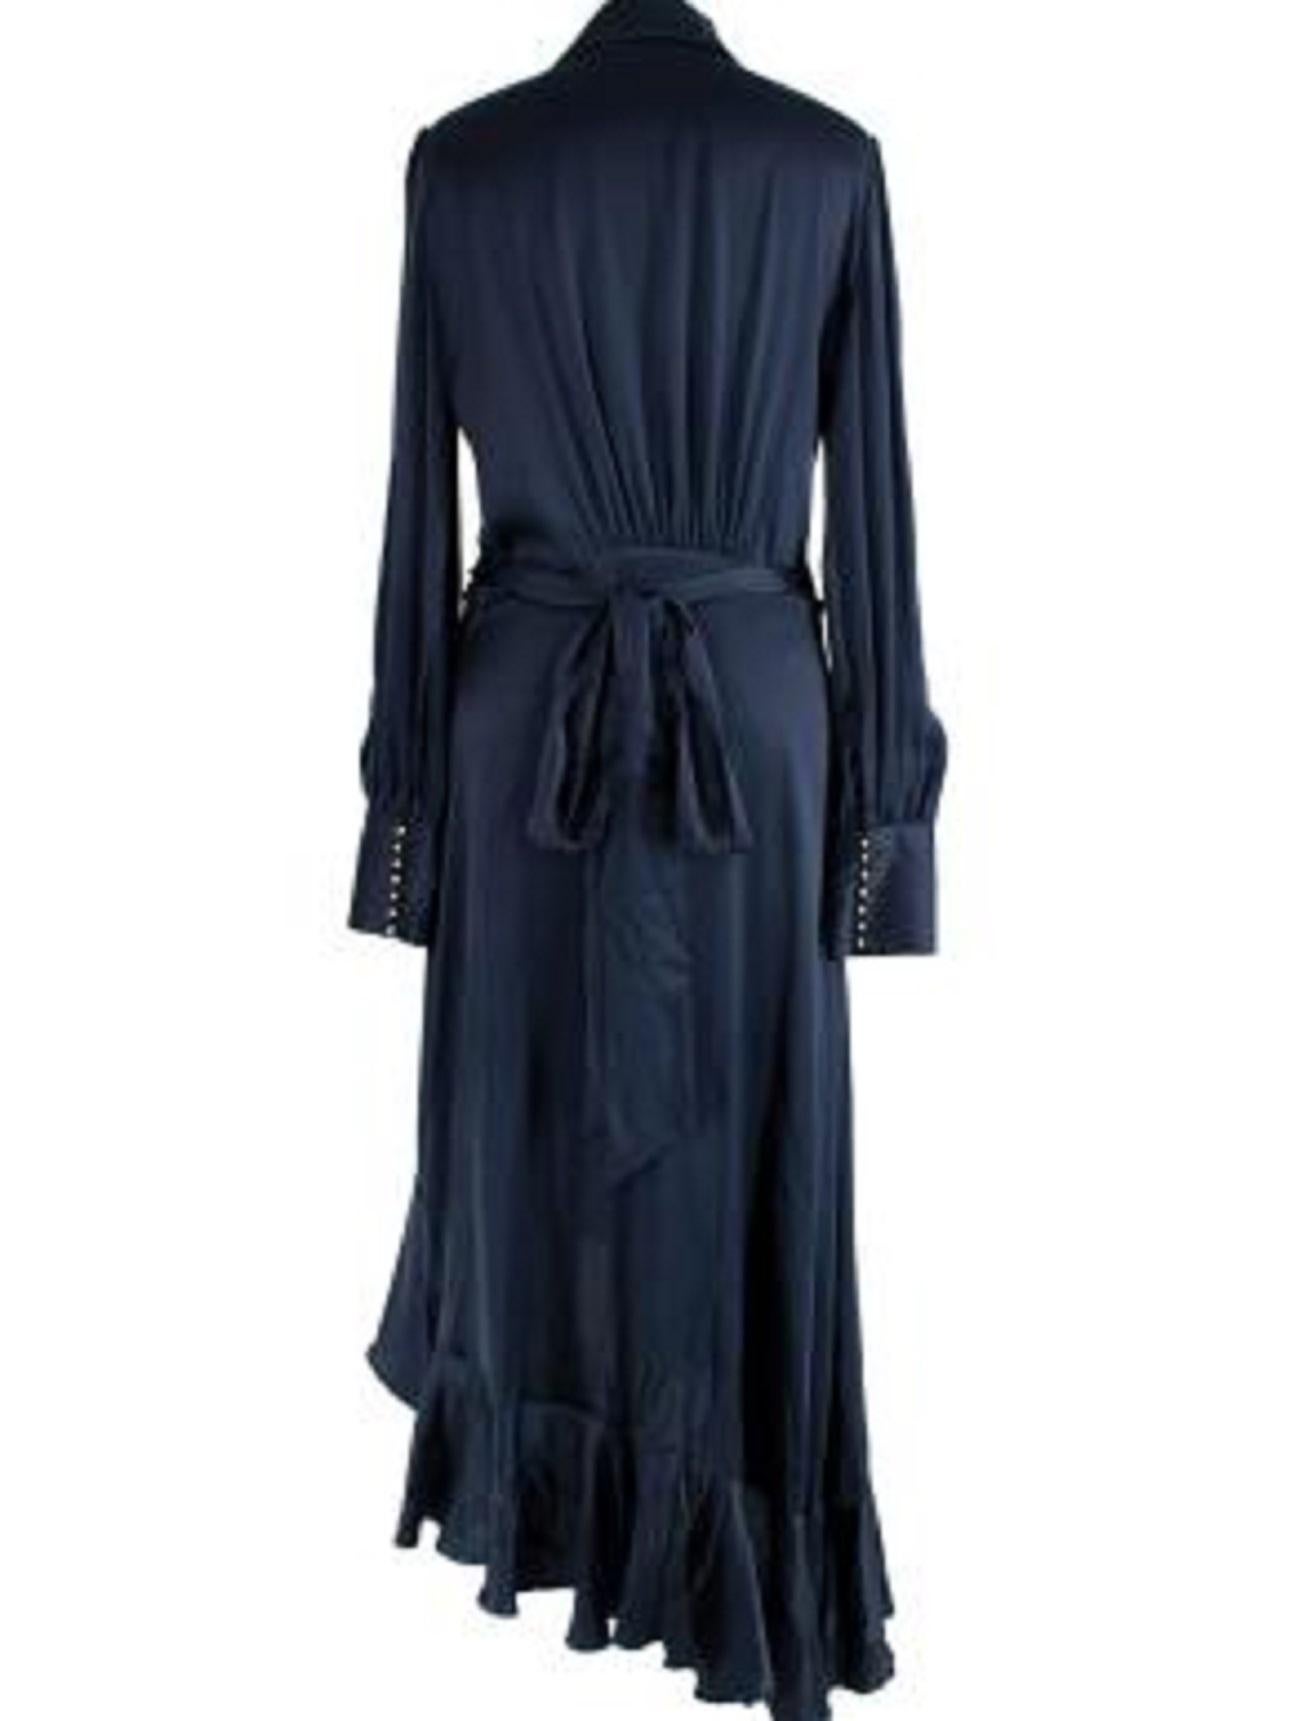 Zimmermann Navy Silk Wrap Midi Dress

-Midi dress
-blouson sleeves
-a shawl collar
-self-tie front
-flounced skirt.

Material
Silk

Washing
Dry clean

MADE IN CHINA

Condition 9.5/10

PLEASE NOTE, THESE ITEMS ARE PRE-OWNED AND MAY SHOW SIGNS OF